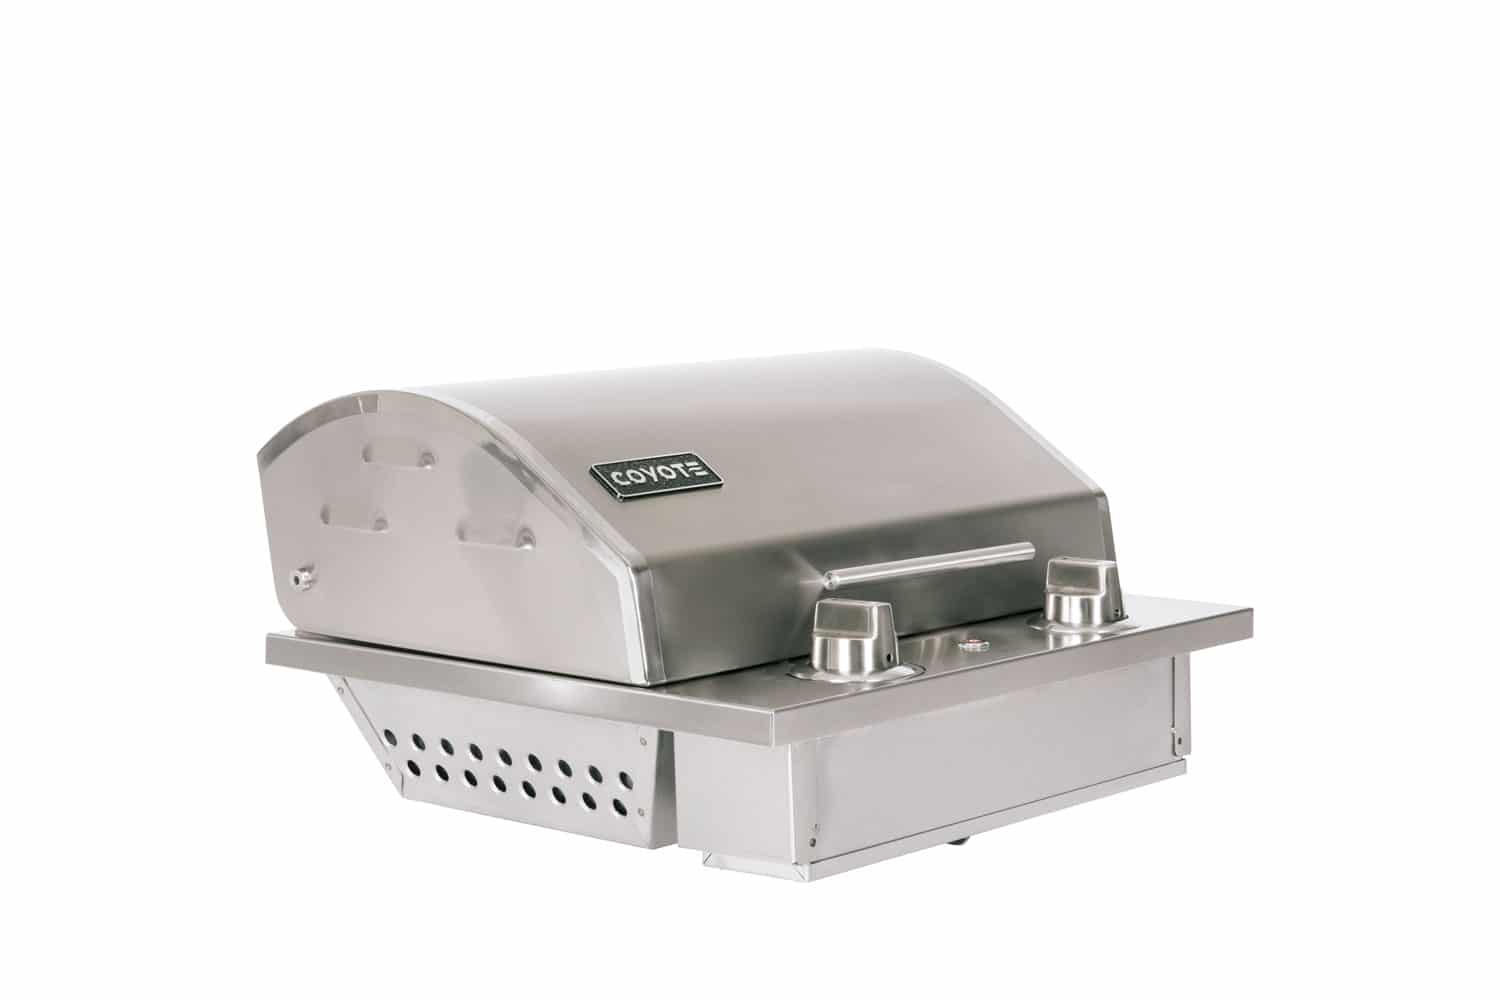 Coyote Electric Grill 